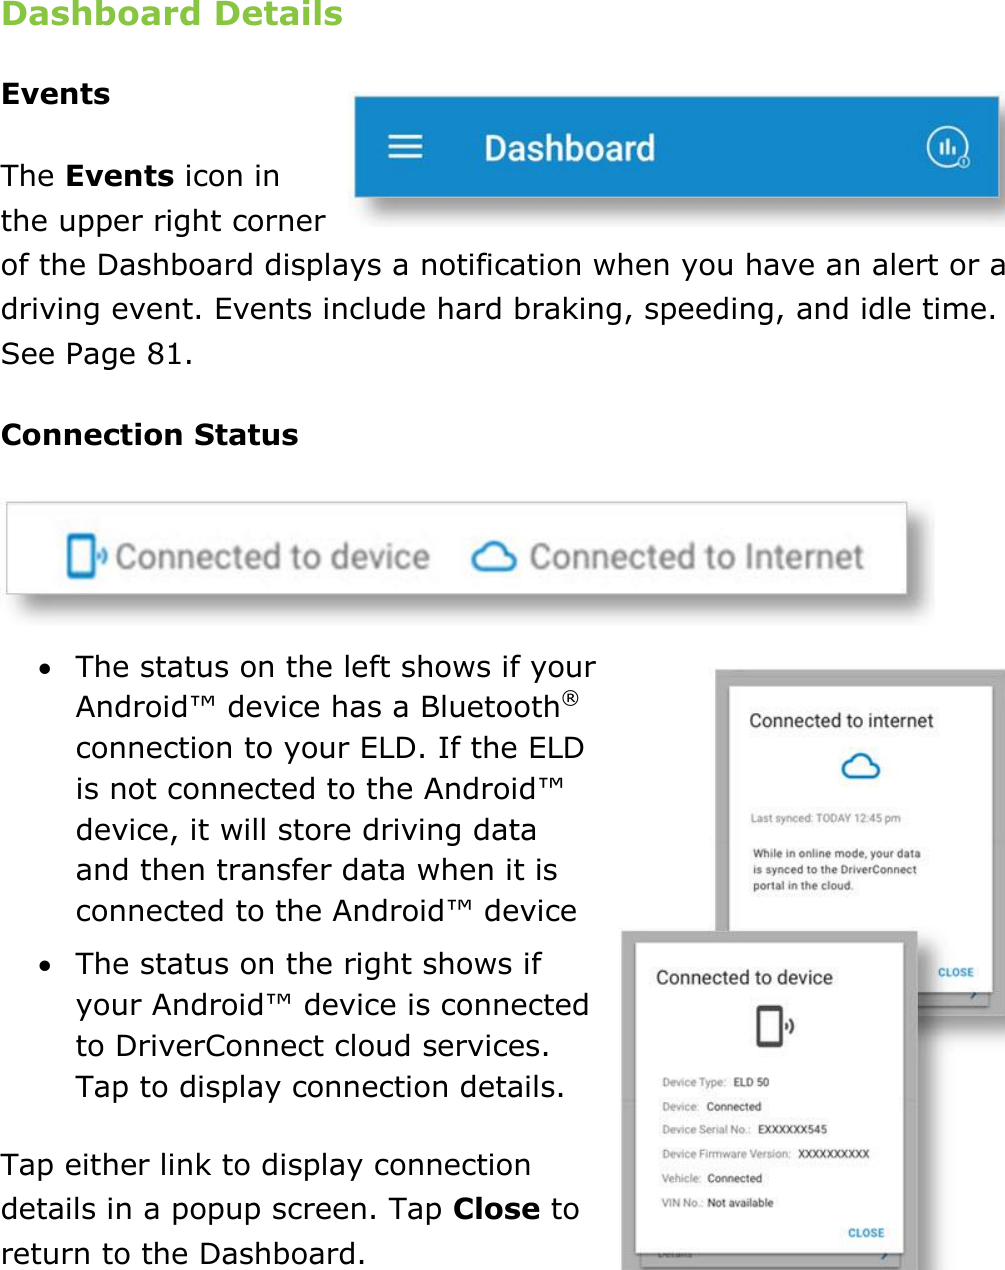 Set My Duty Status DriverConnect User Guide  22 © 2017, Rand McNally, Inc. Dashboard Details Events The Events icon in the upper right corner of the Dashboard displays a notification when you have an alert or a driving event. Events include hard braking, speeding, and idle time. See Page 81. Connection Status   The status on the left shows if your Android™ device has a Bluetooth® connection to your ELD. If the ELD is not connected to the Android™ device, it will store driving data and then transfer data when it is connected to the Android™ device  The status on the right shows if your Android™ device is connected to DriverConnect cloud services. Tap to display connection details. Tap either link to display connection details in a popup screen. Tap Close to return to the Dashboard.   